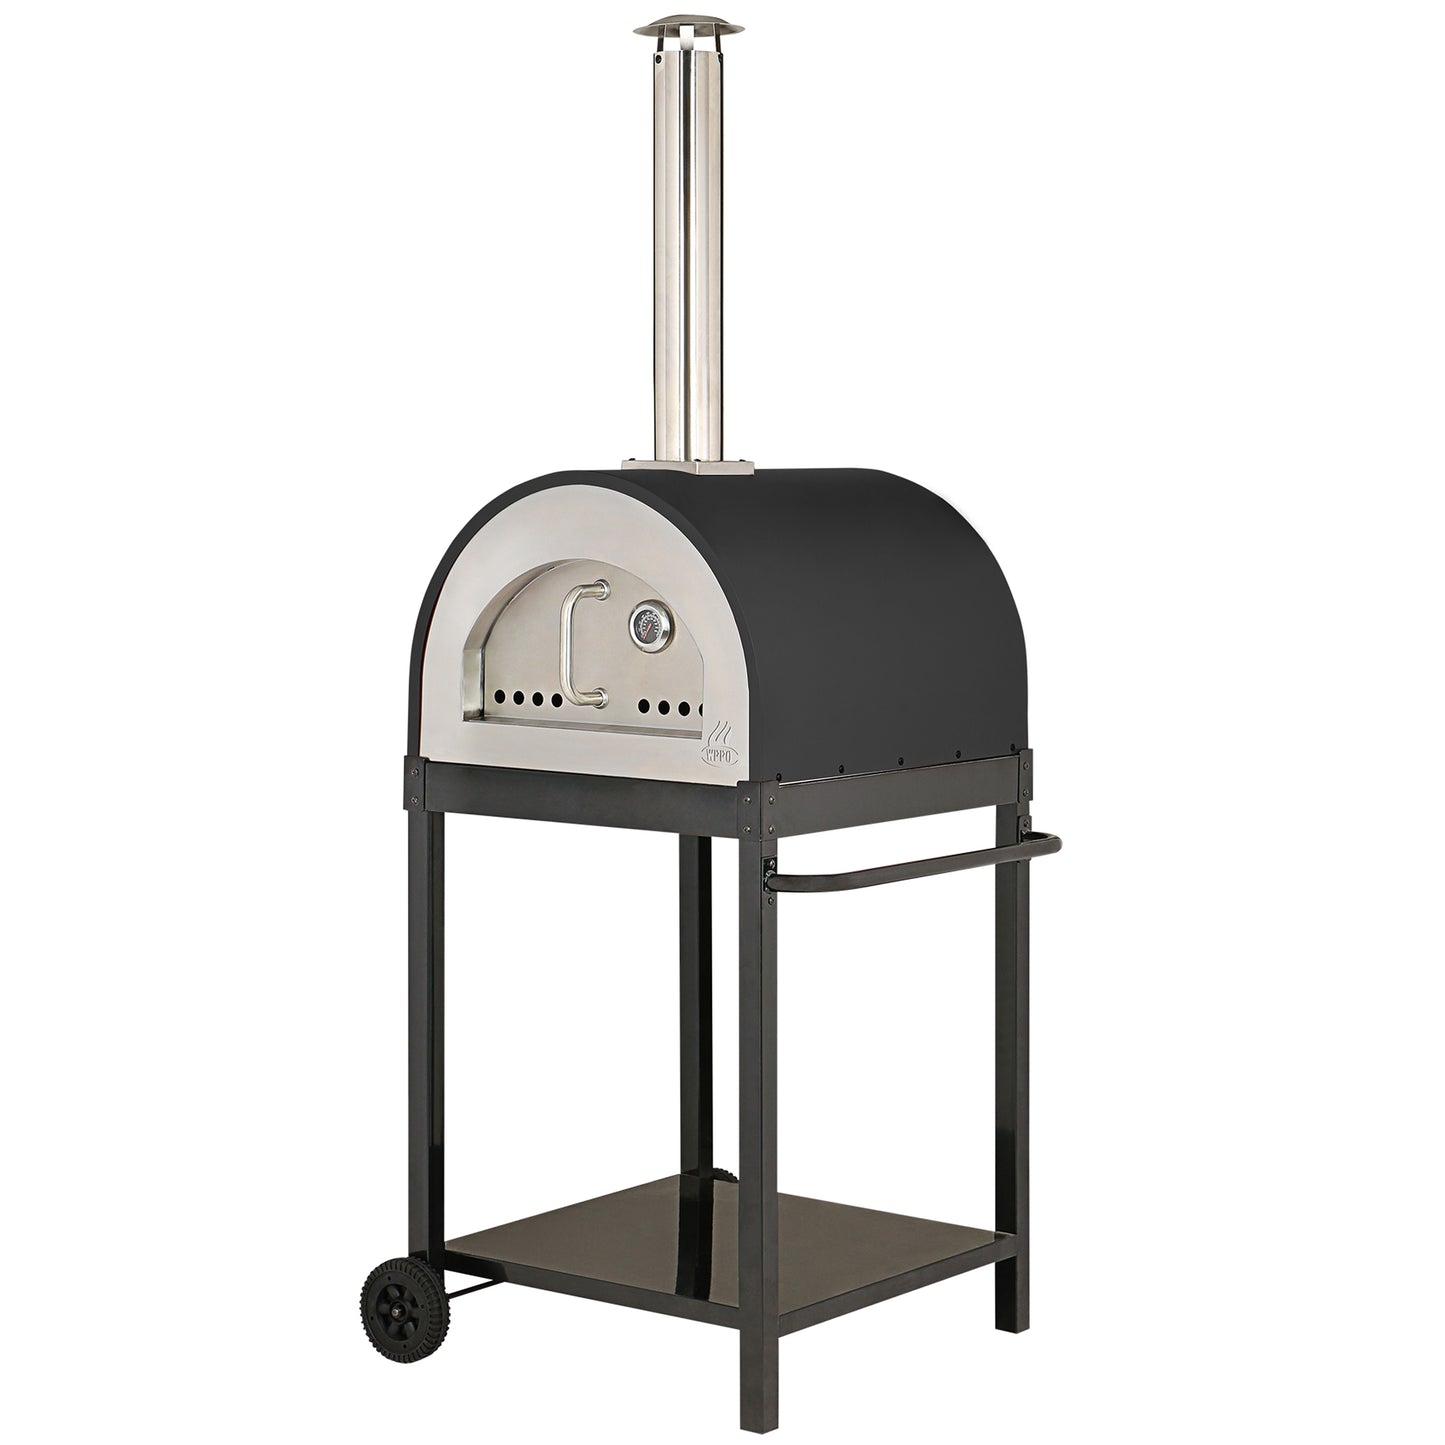 SUPER SALE! 50% OFF! Gas-Ready Traditional 25" Pizza Oven